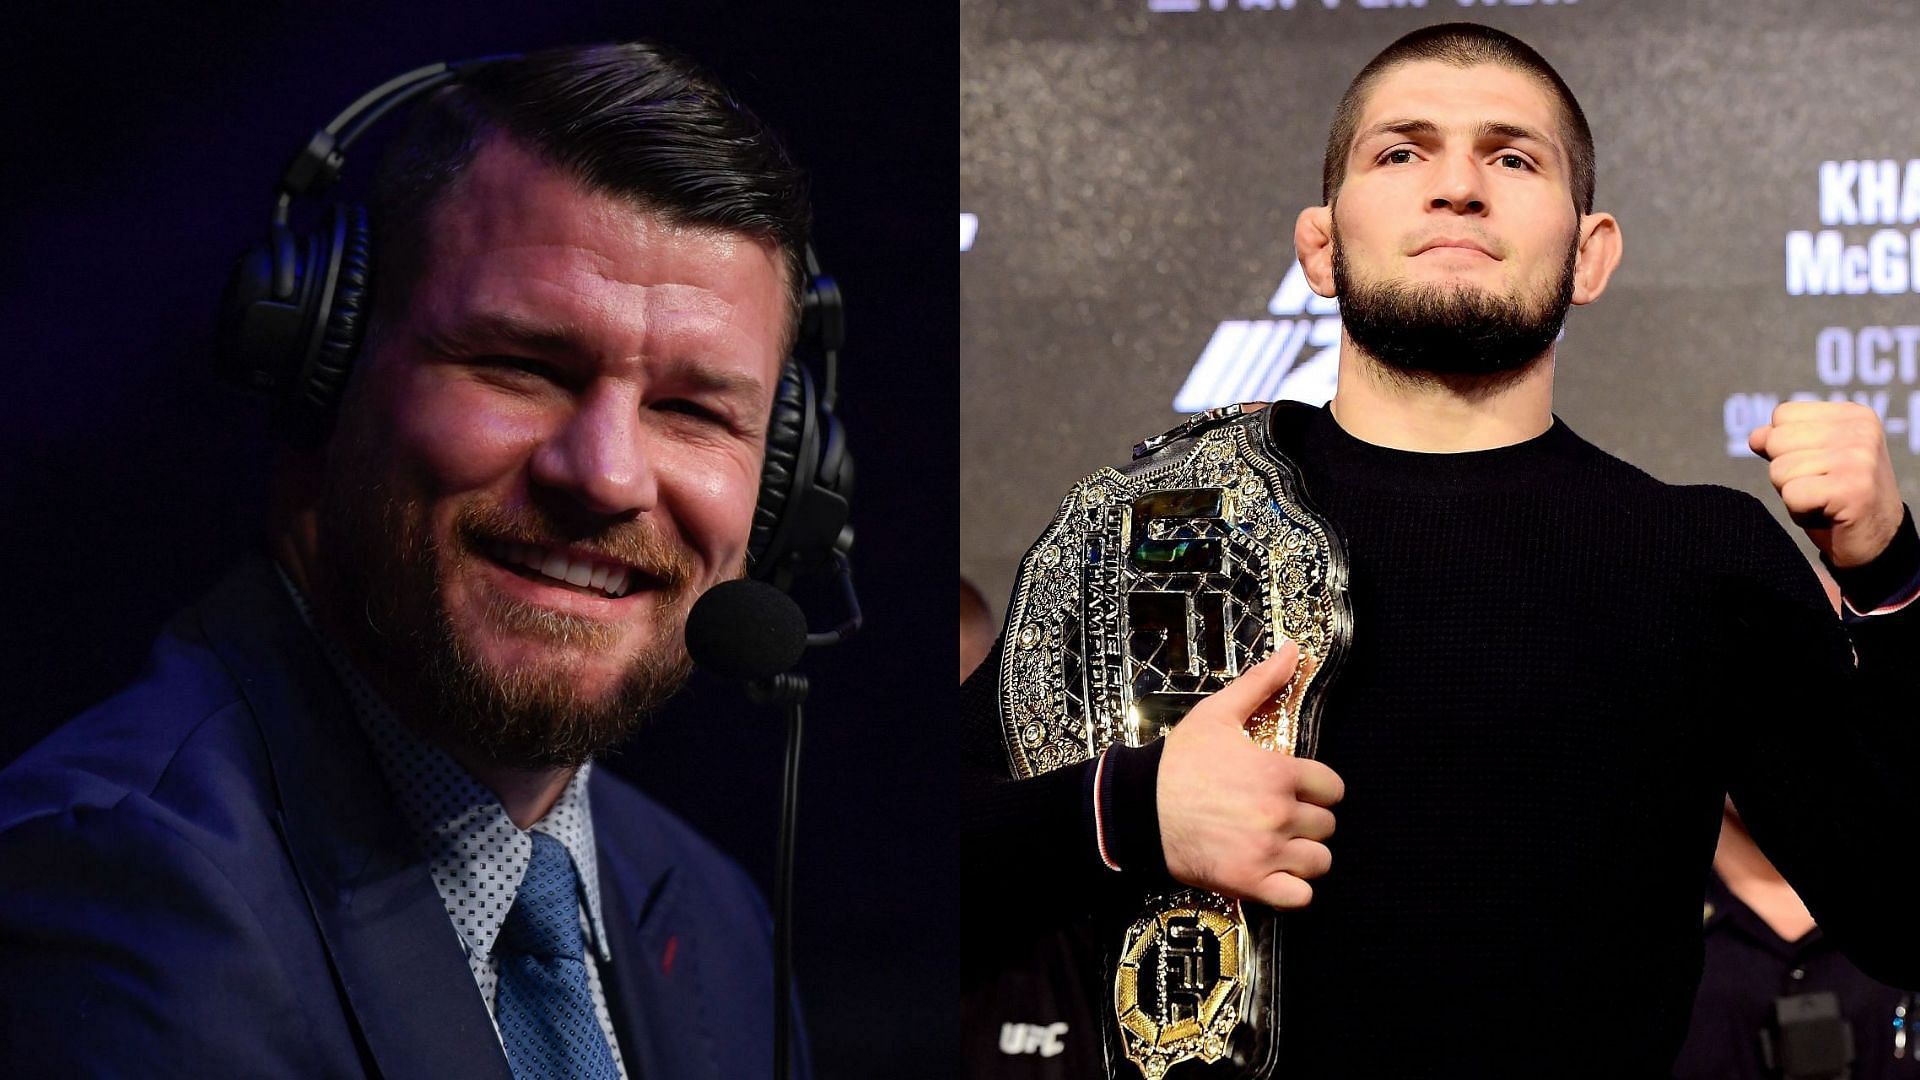 Michael Bisping (left) and Khabib Nurmagomedov (right) [Images courtesy of Getty]